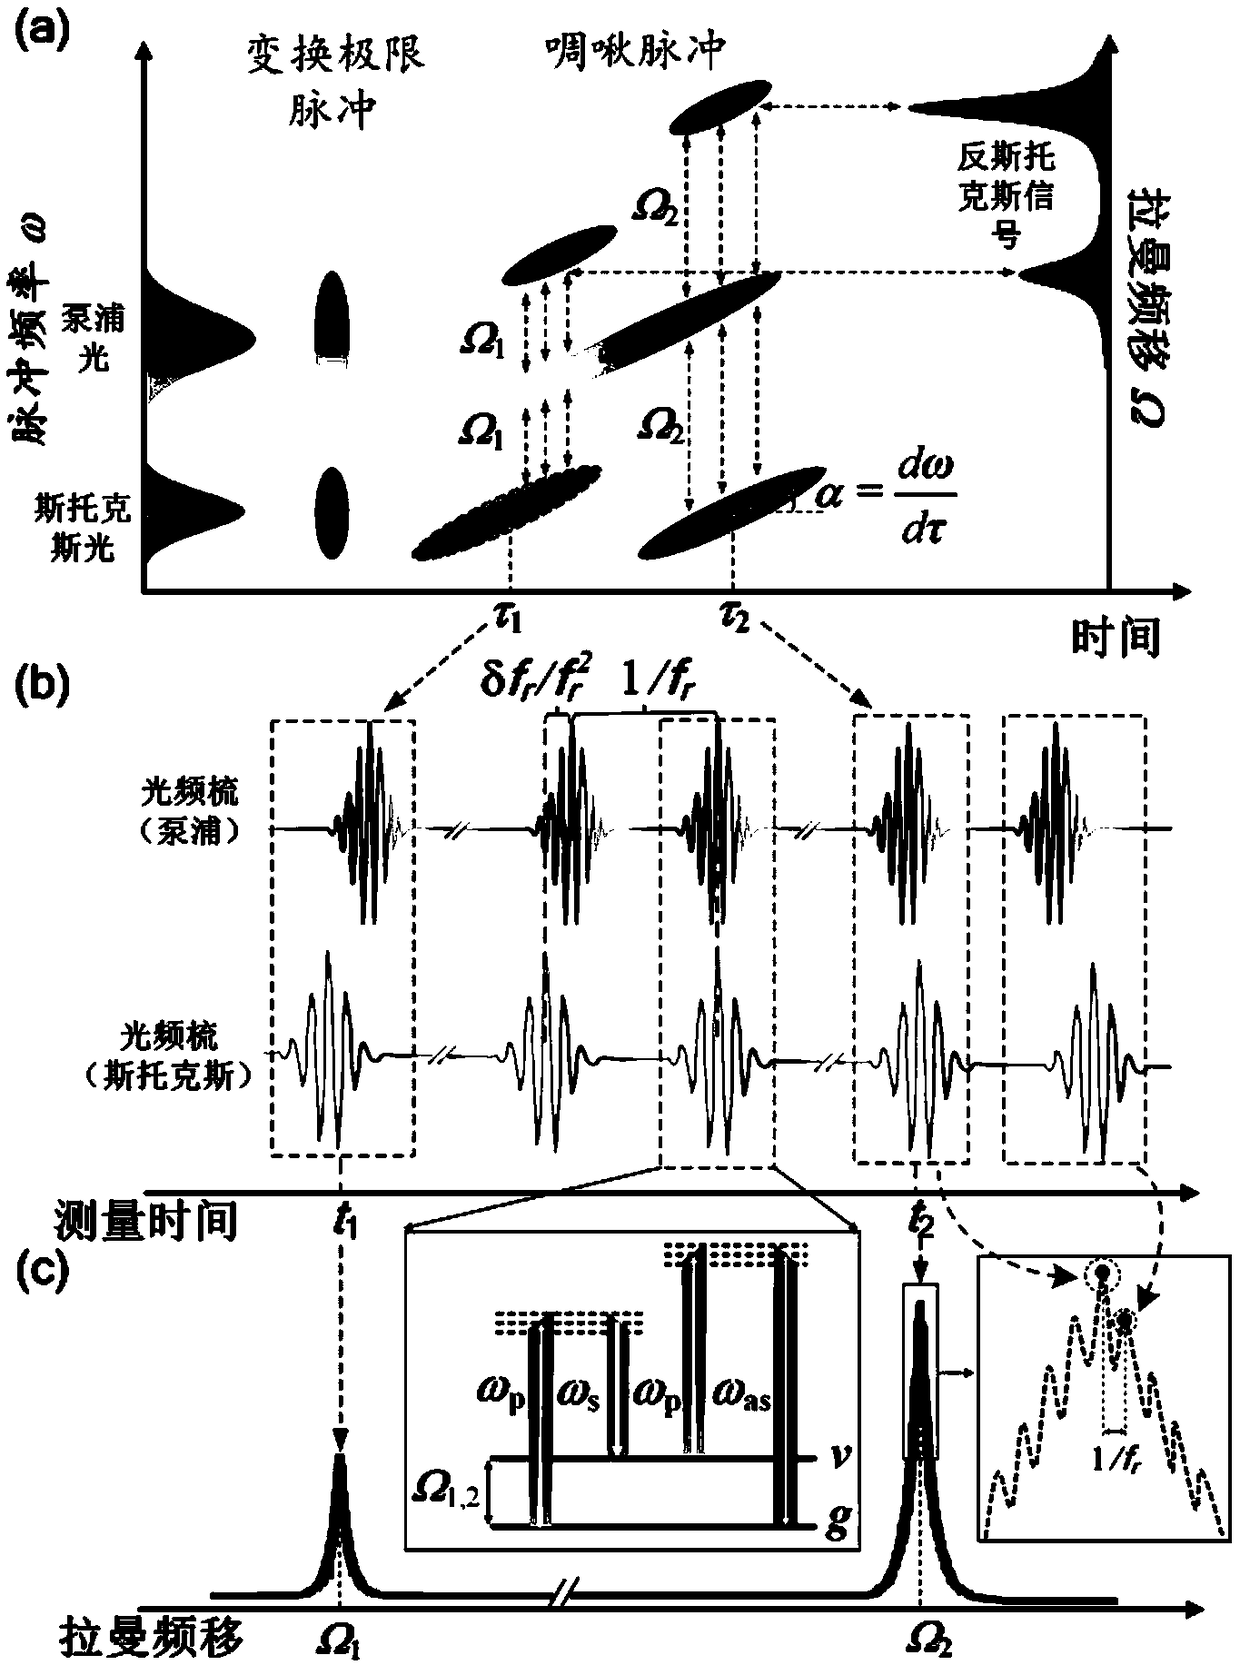 Dual-optical frequency comb spectrum focusing coherent anti-stokes Raman scattering detection system